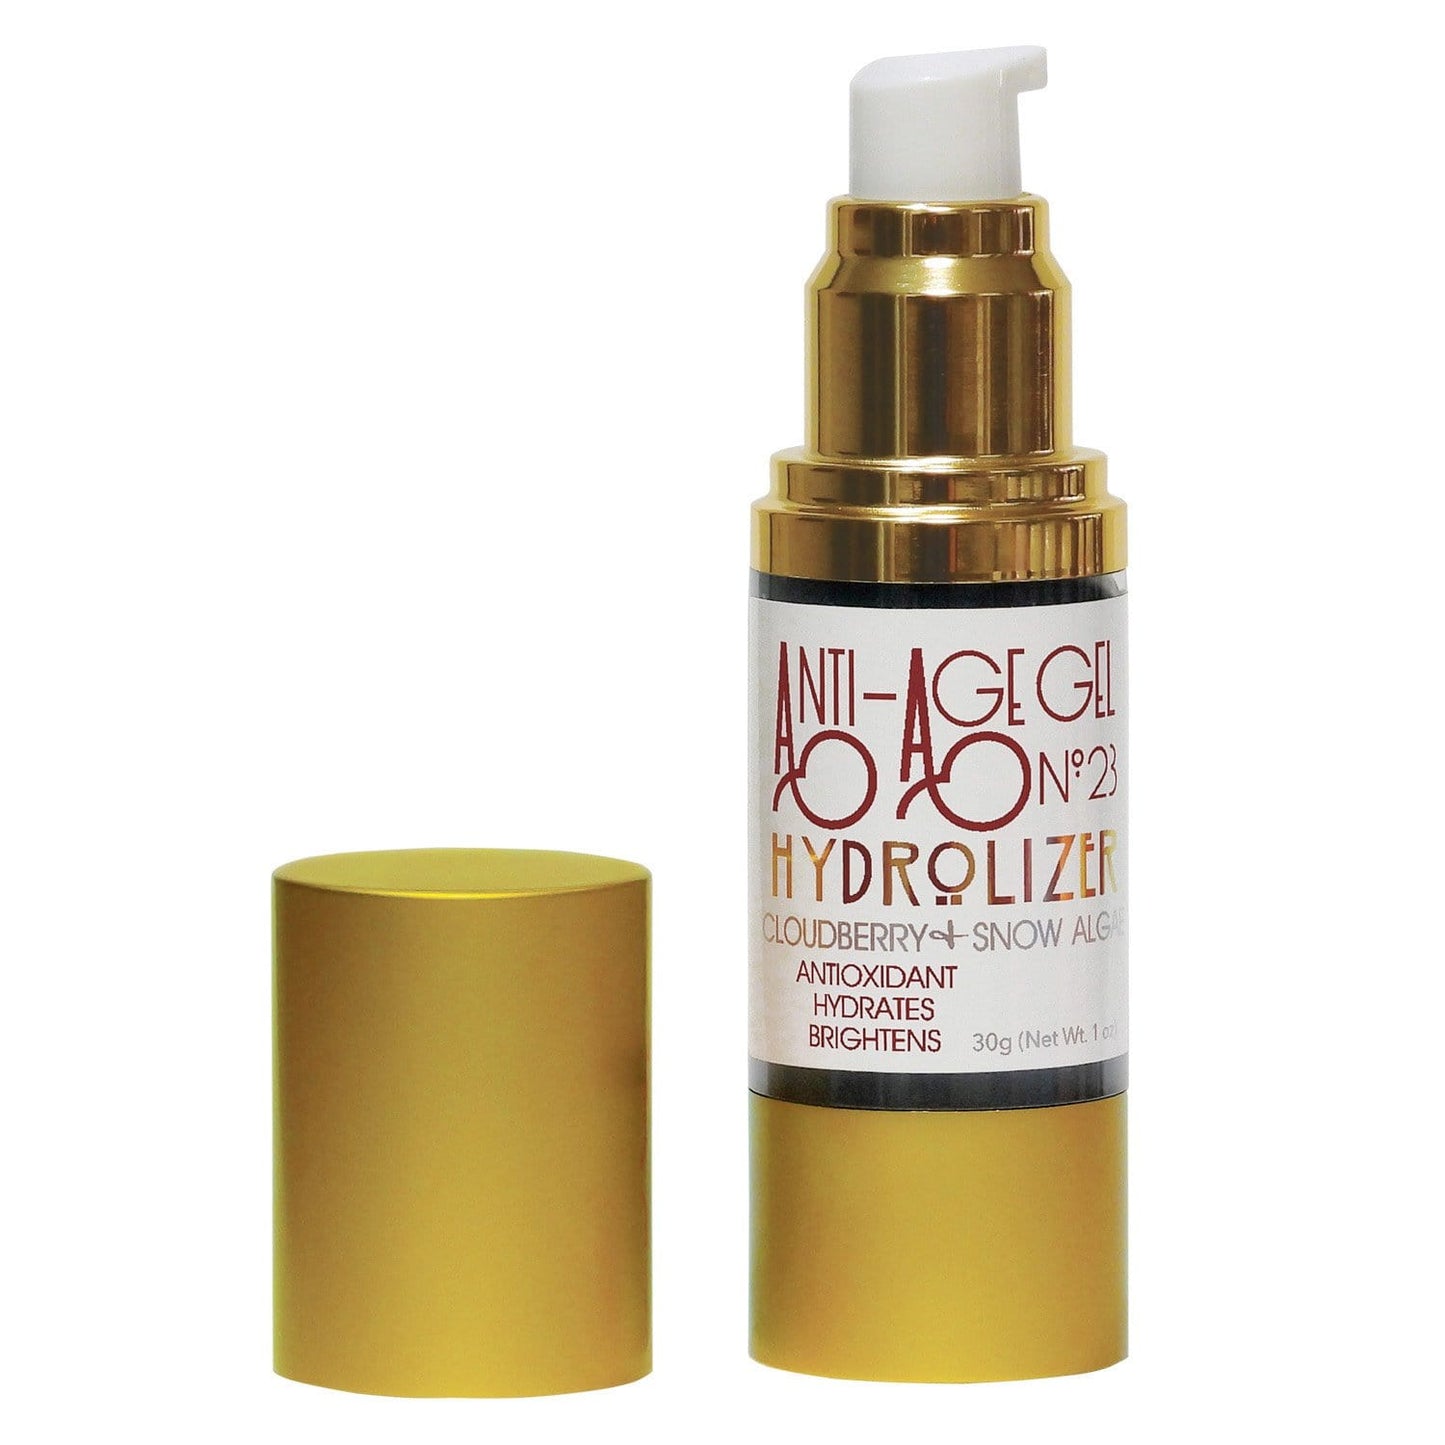 A Combination of the #1 Antioxidant - Lycopene Crema Rinnovante and the Latest in Moisturizers - Anti-Aging Hydrolizer